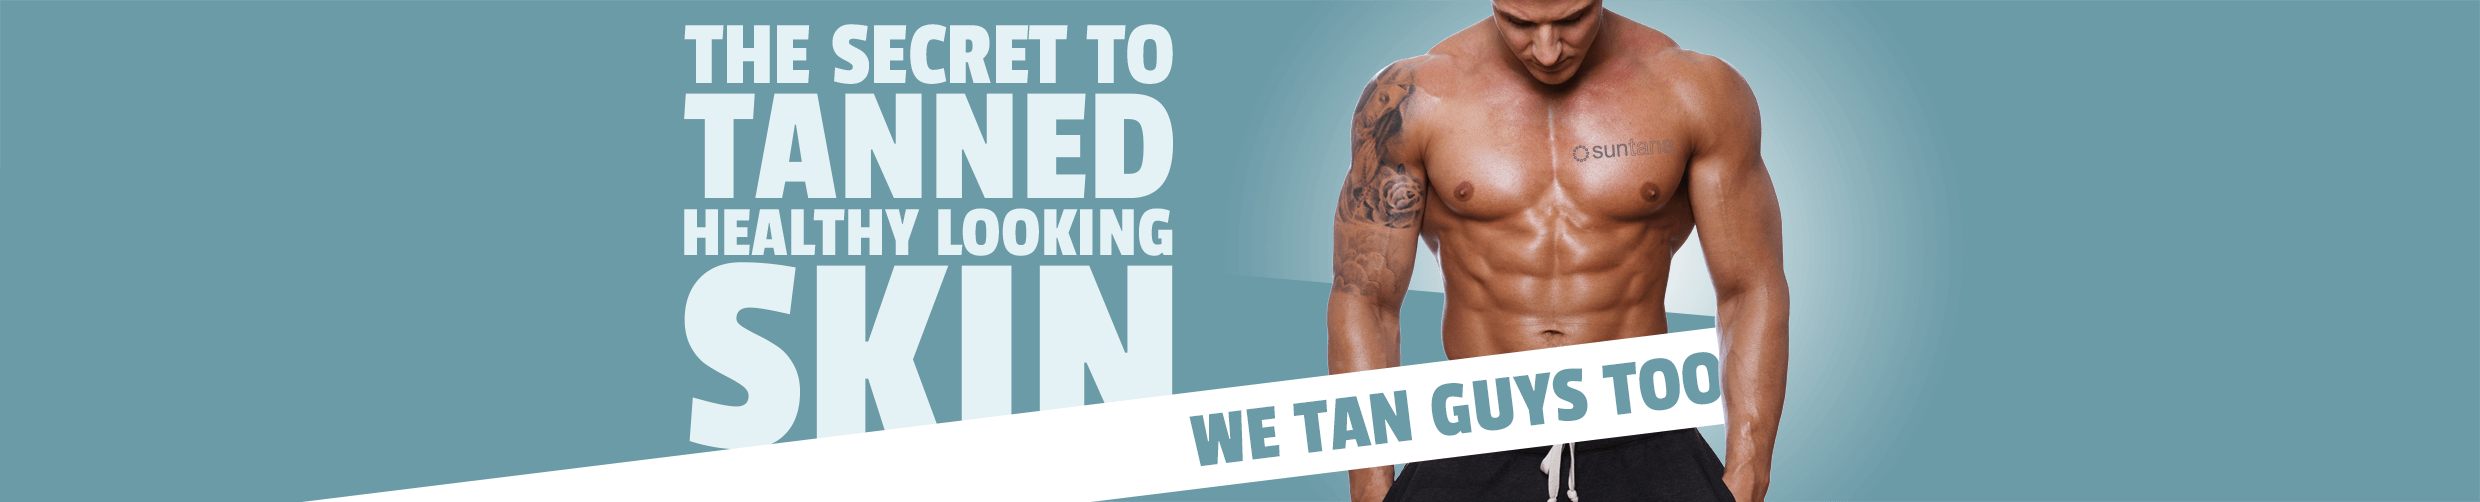 The secret to tanned, healthy looking skin - We tan men too